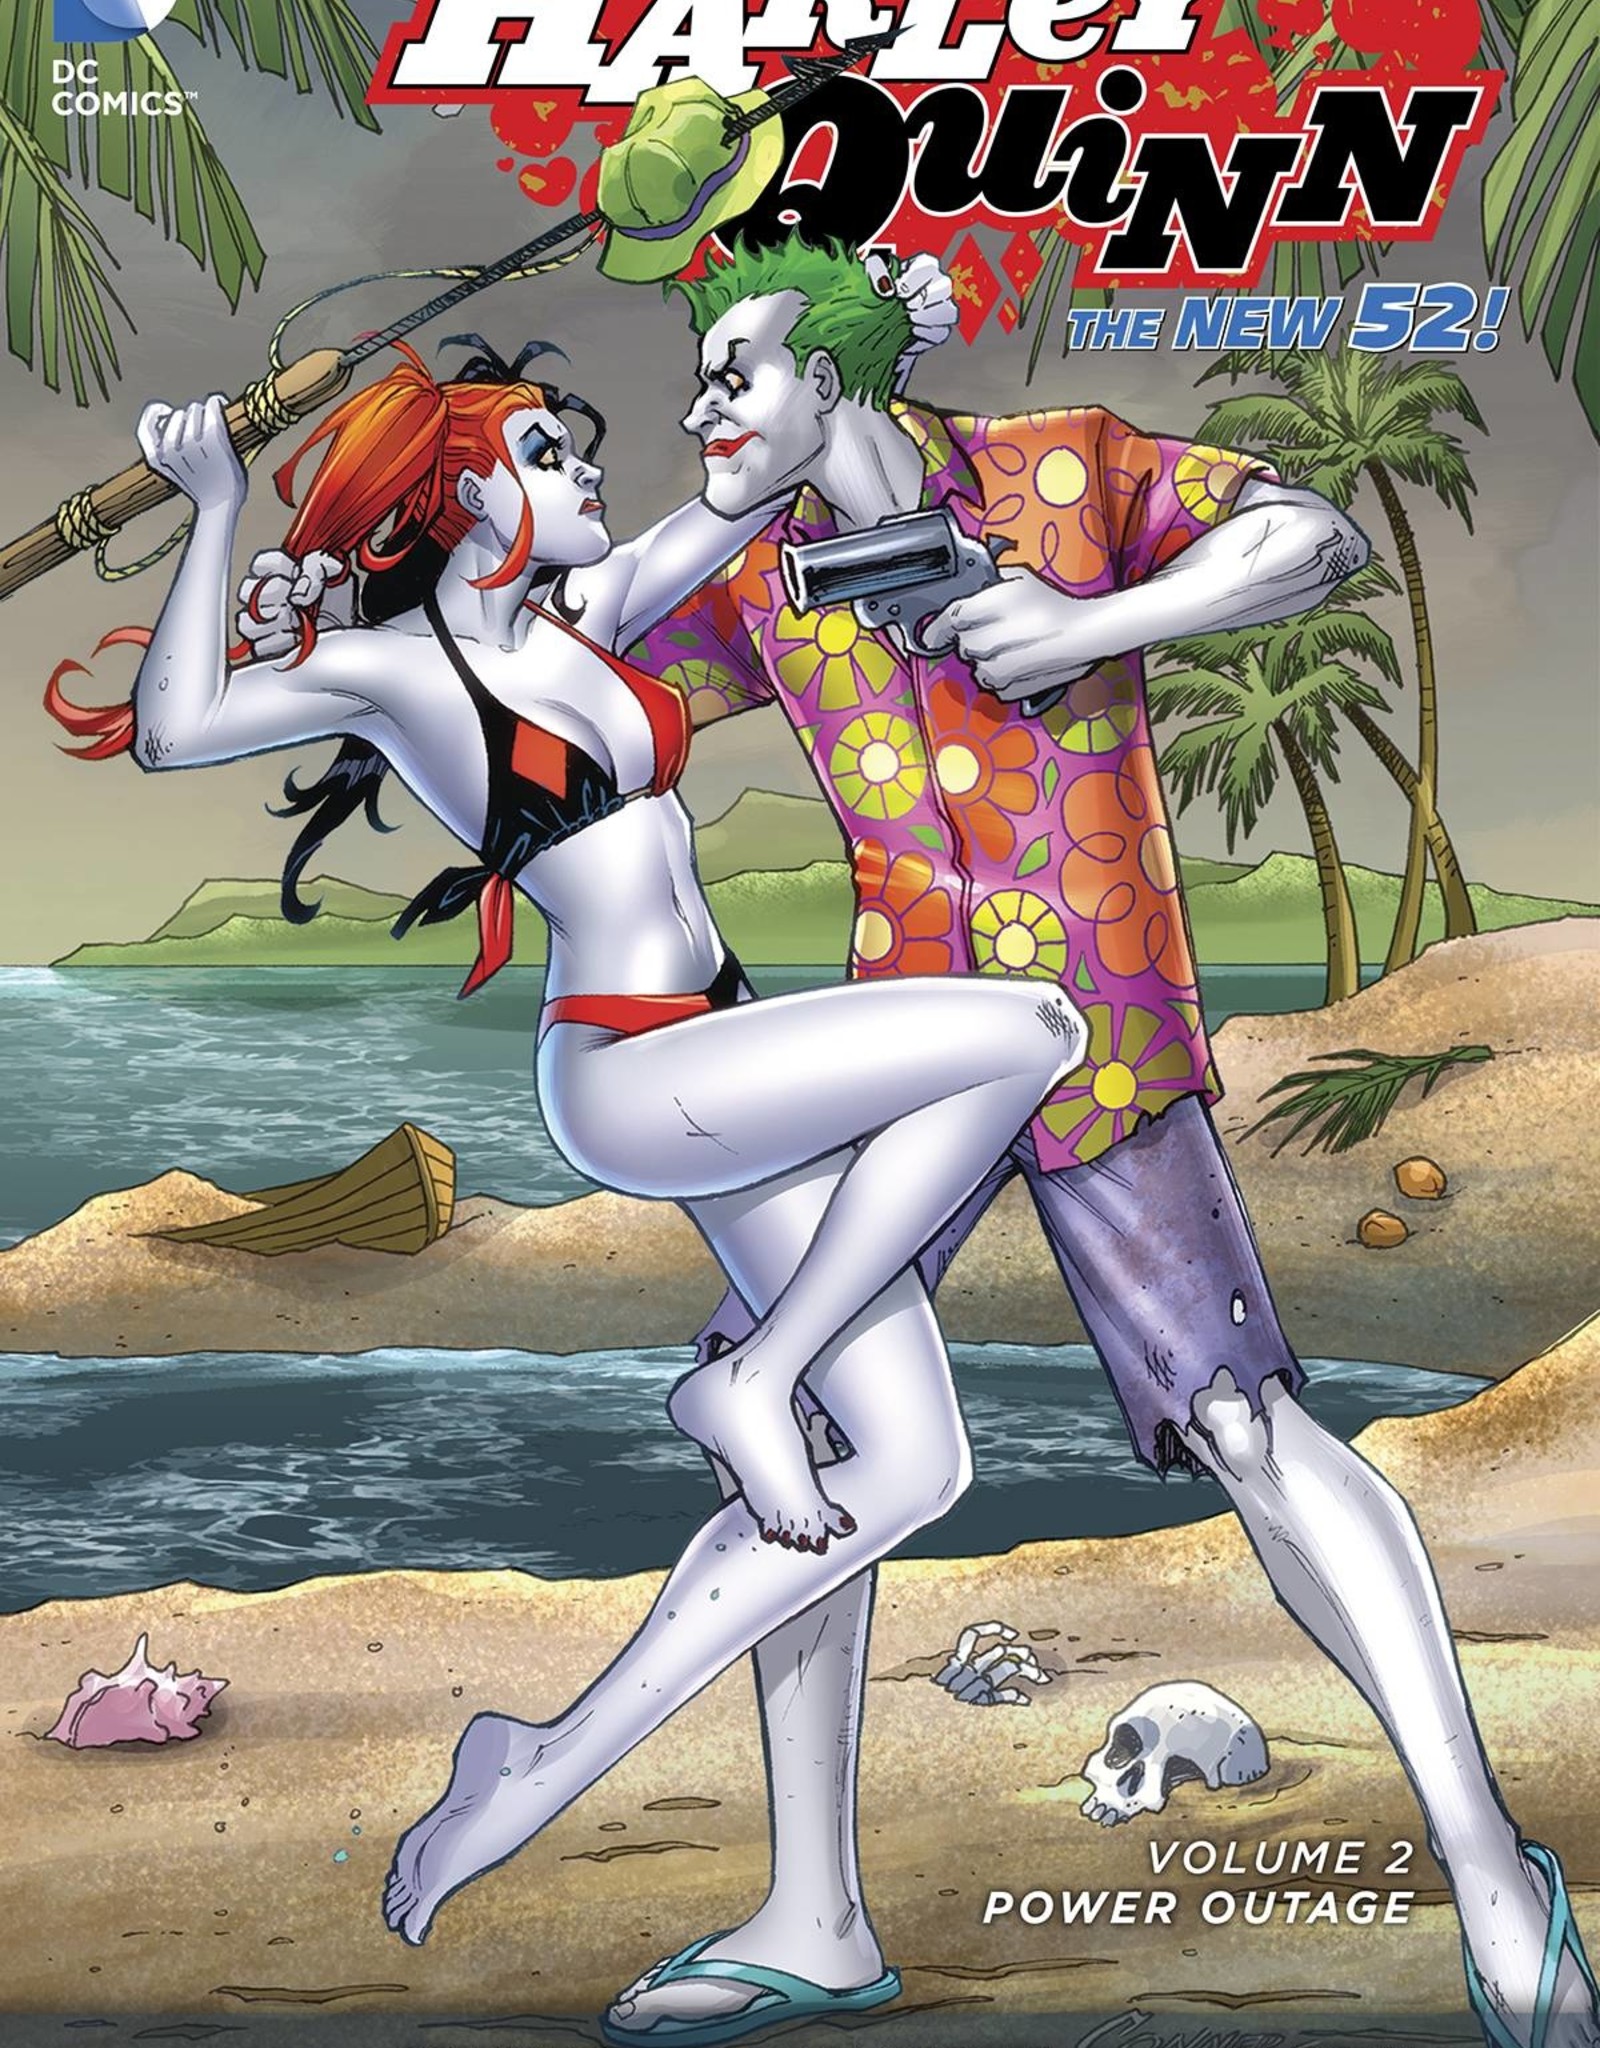 DC Comics Harley Quinn TP Volume 2 Power Outage